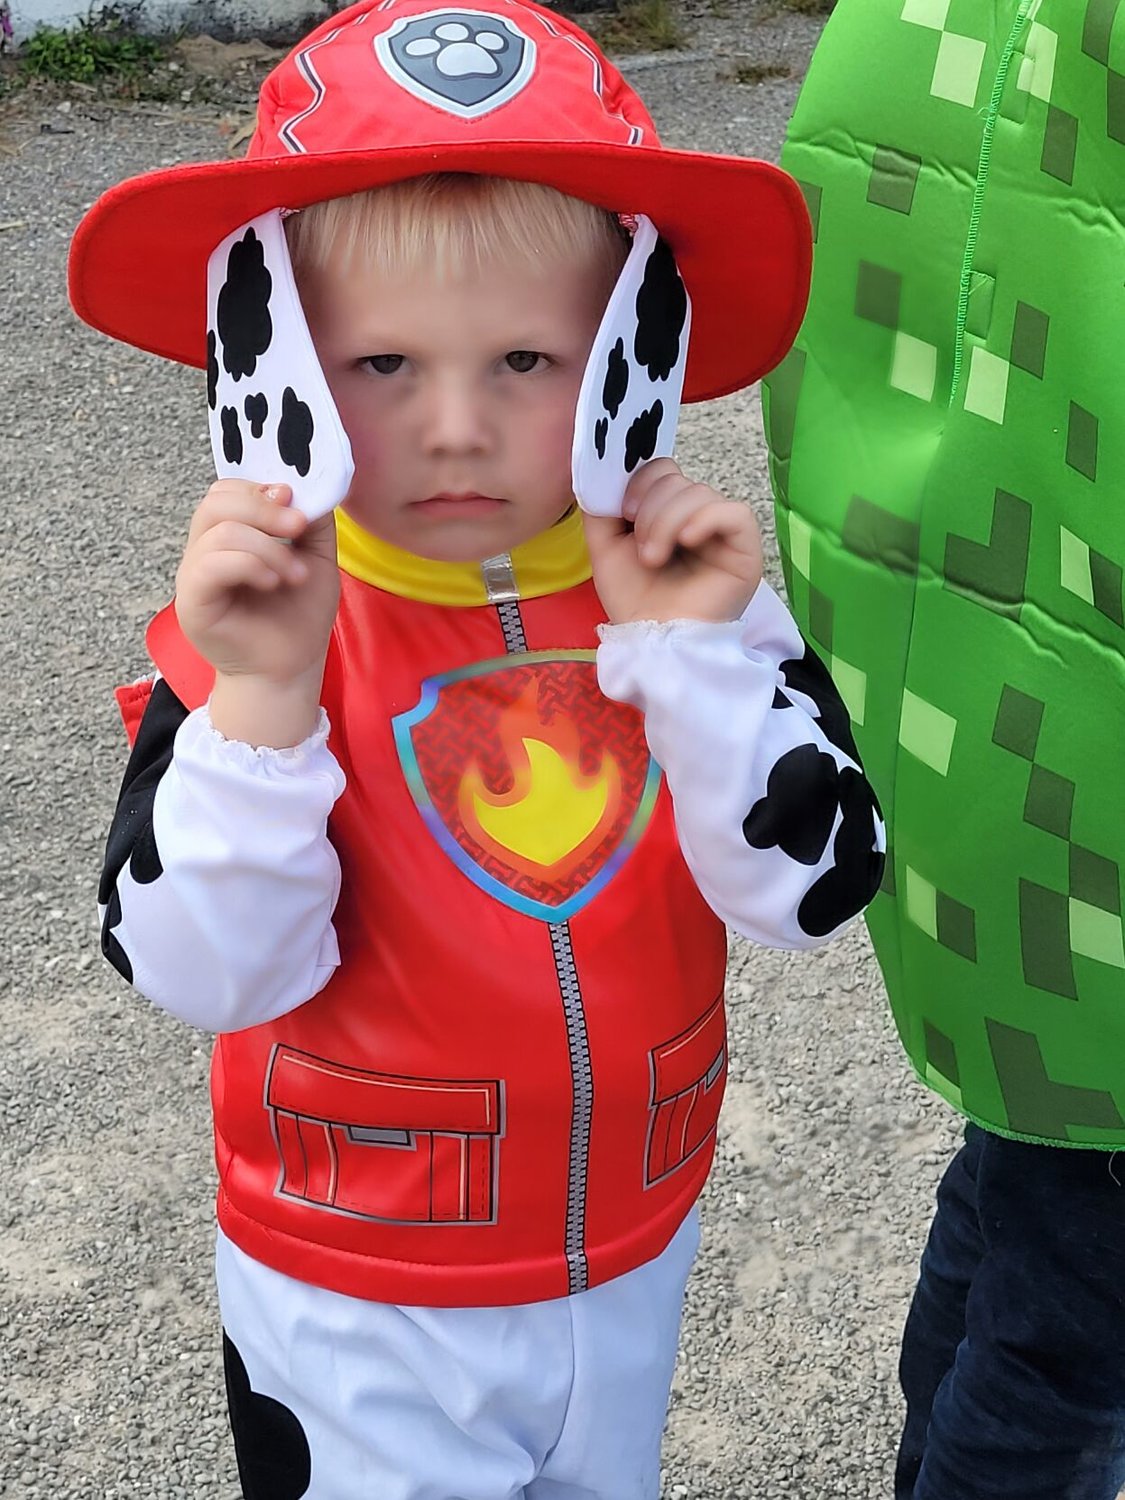 Puppy power! Carter Booyer sports his Paw Patrol costume at the Niangua Fall Festival Costume Contest.